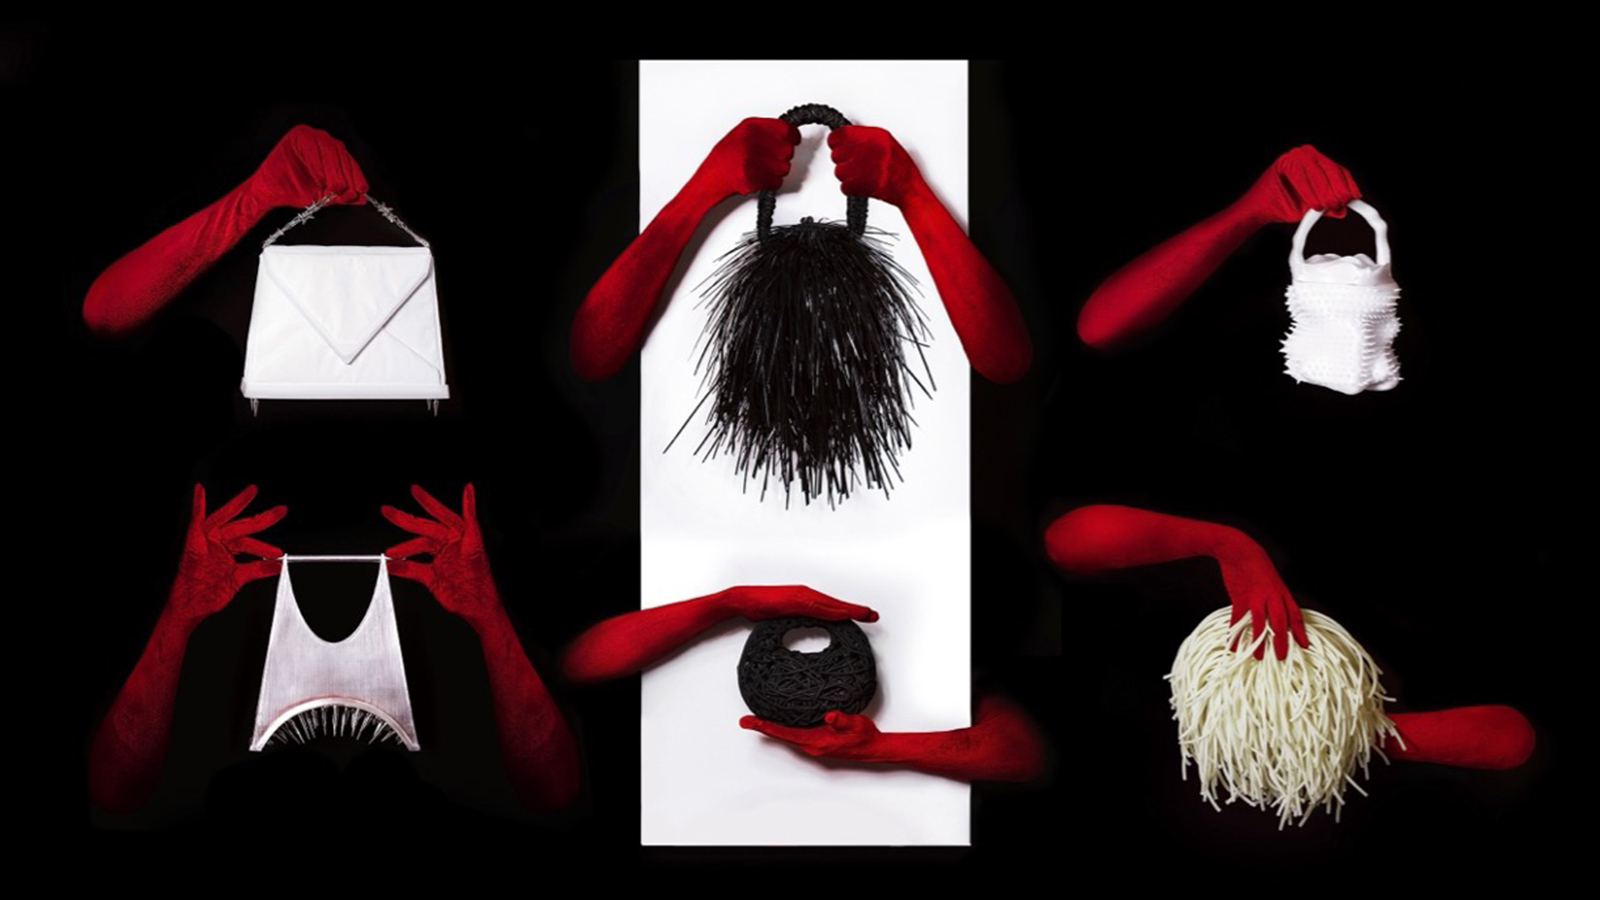 six handbags in Rafael Bertacini's collection, each held by arms wearing red gloves, photographed on either black or white backgrounds